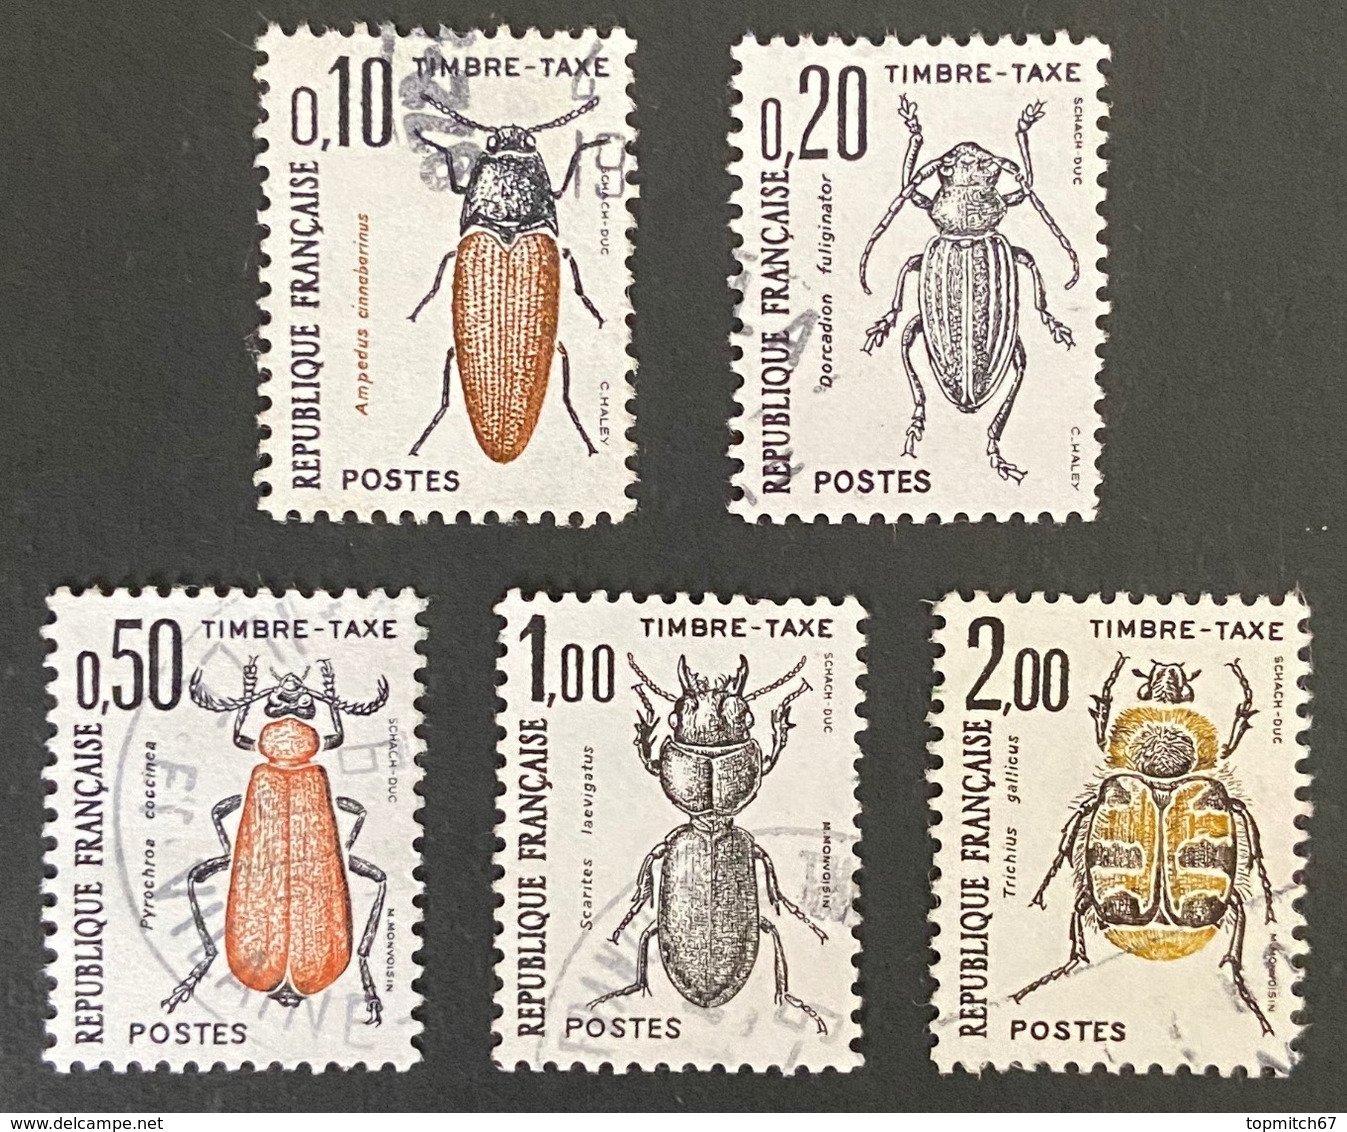 FRAYX103-07U - Timbres Taxe Insectes Coléoptères (I) Set Of 5 Used Stamps 1982 - France YT YX 103-07 - Stamps